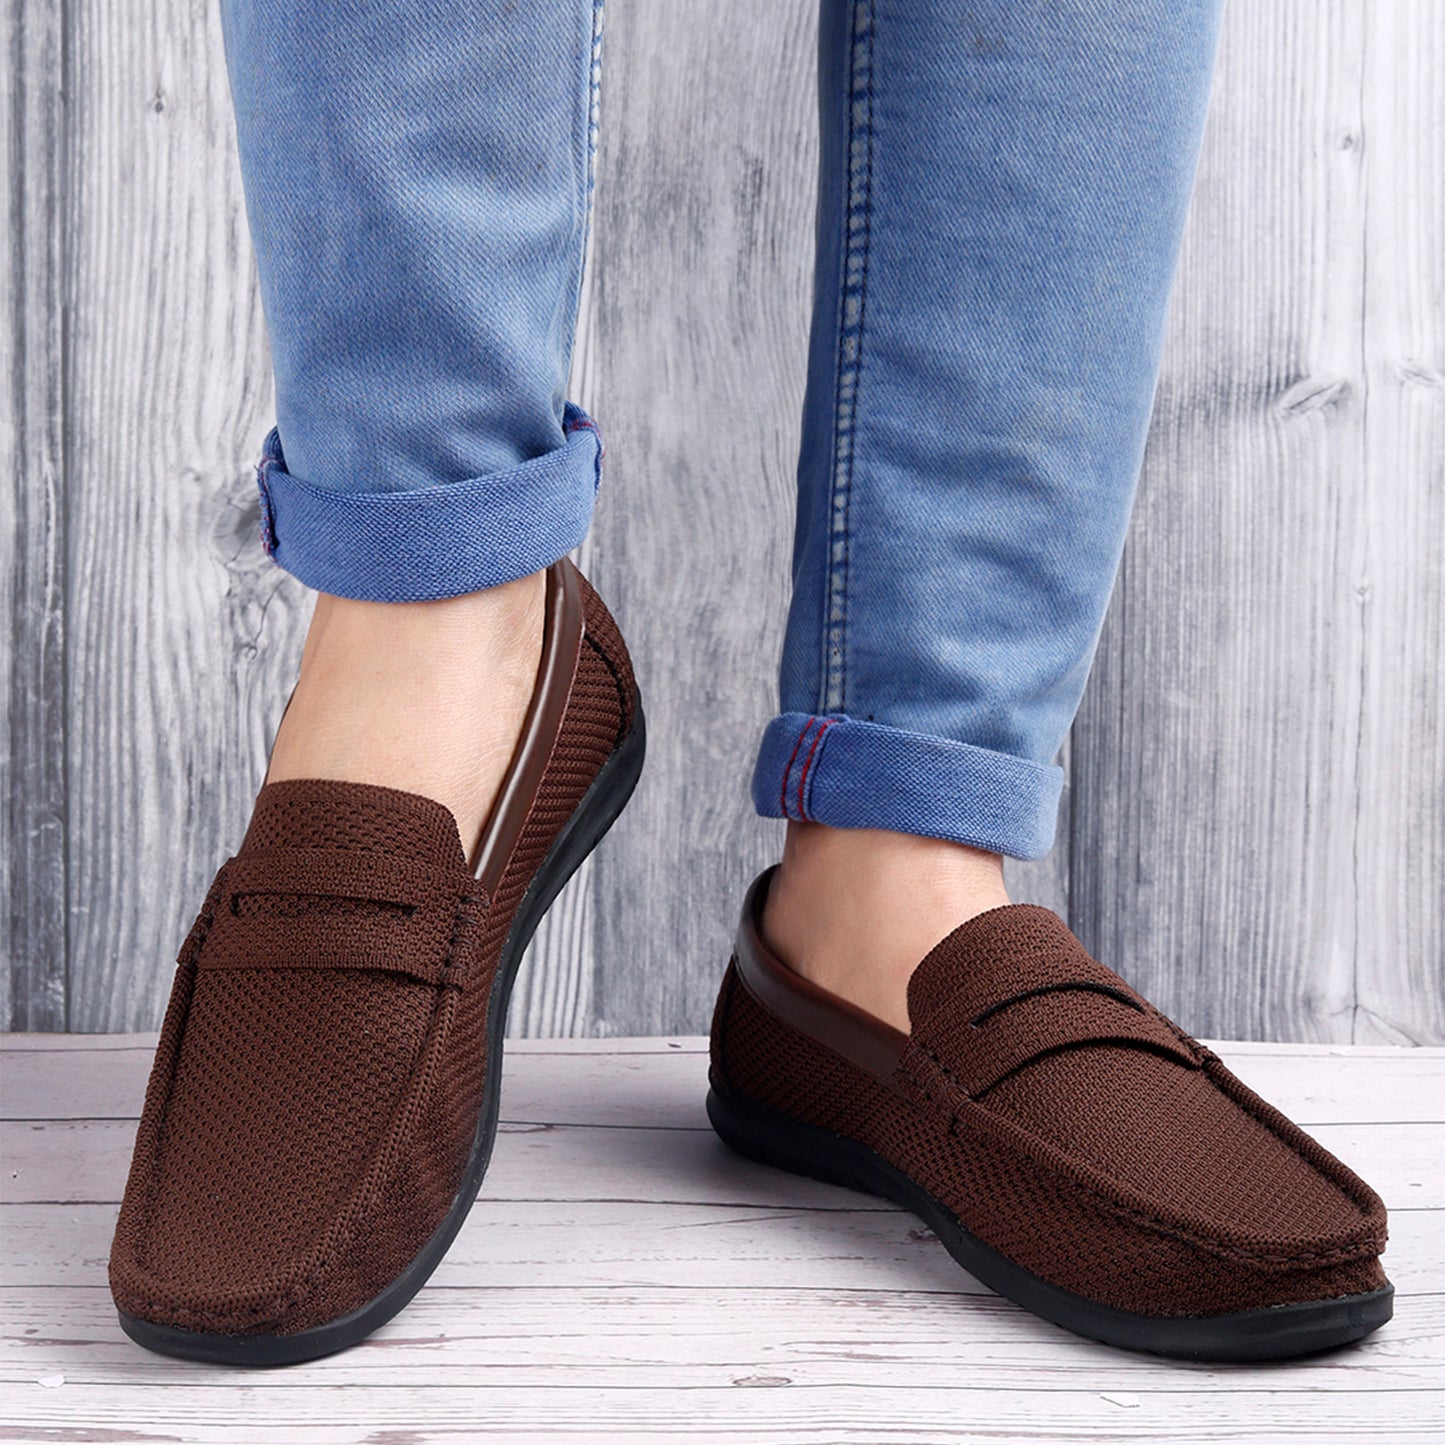 Men's Latest Stylish Casual Loafers